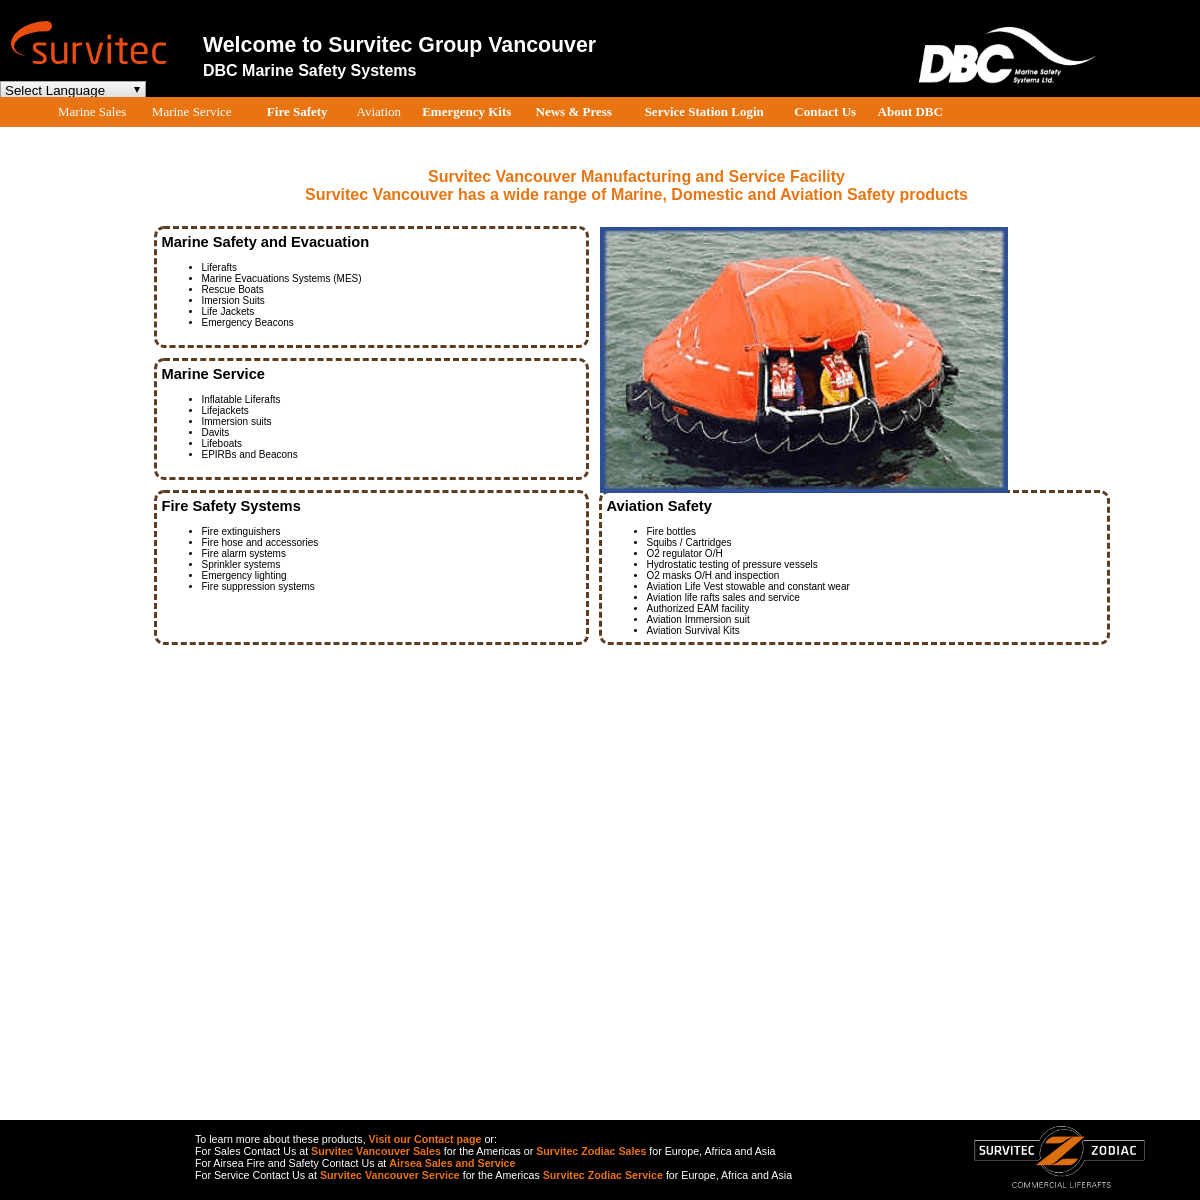 A complete backup of dbcmarine.com